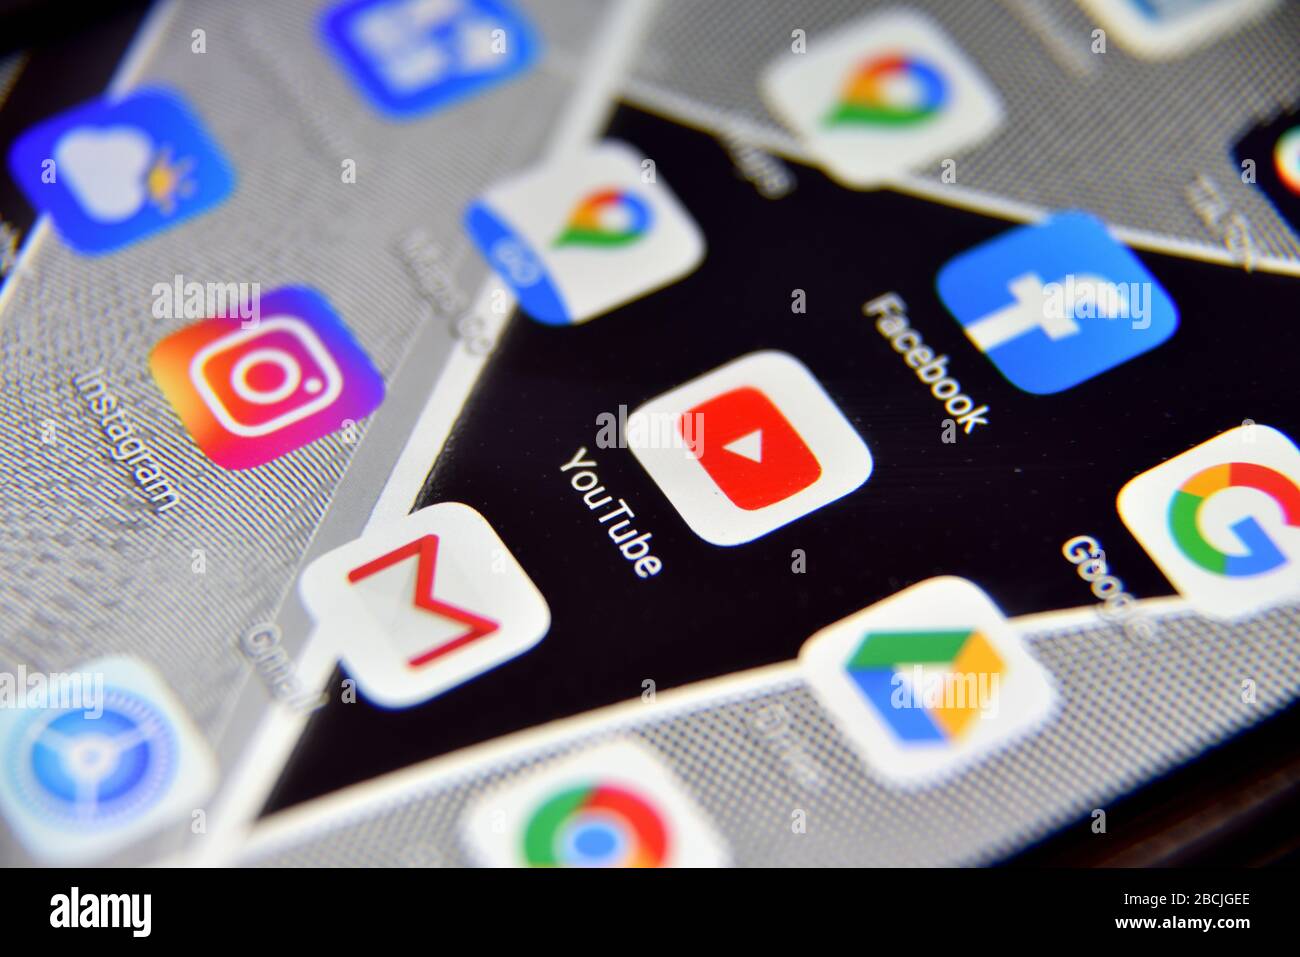 Valverde (CT), Italy - April 04, 2020: Close-up view of YouTube icon app on an Android smartphone, including other icons. Stock Photo